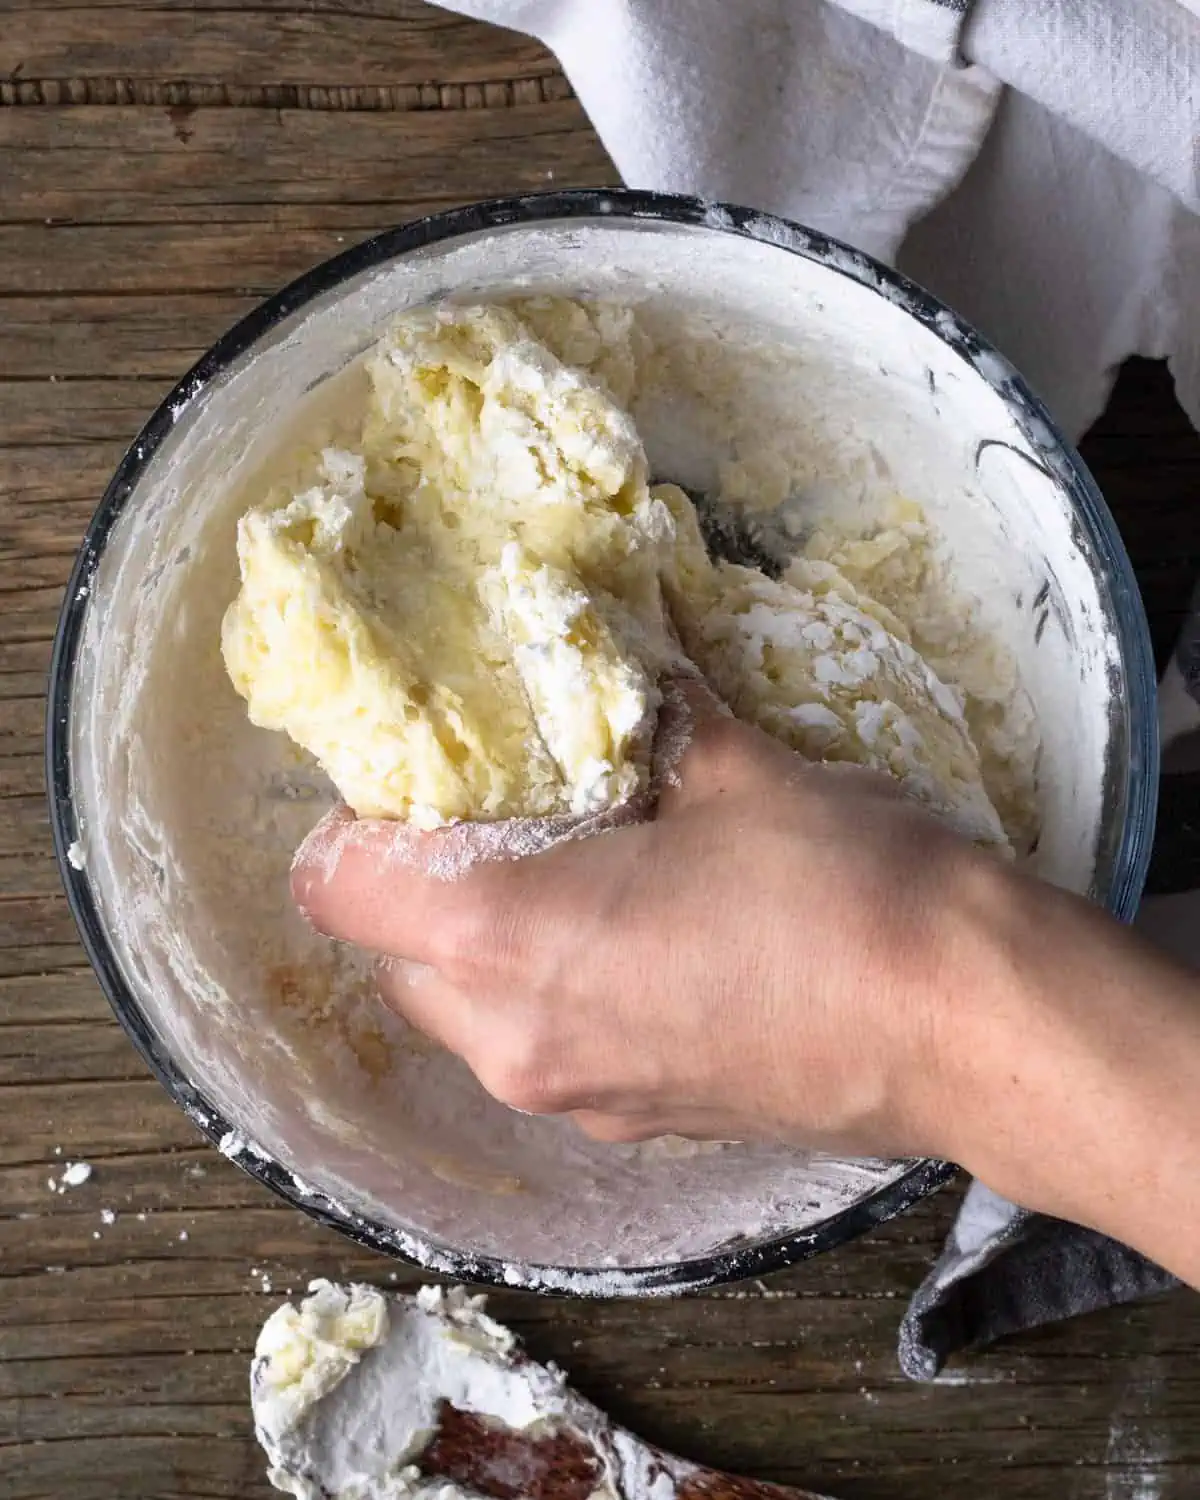 Prep shot for a recipe for pao de queijo recipe. The image shows a bowl of tapiocabatter being kneaded by a human hand.